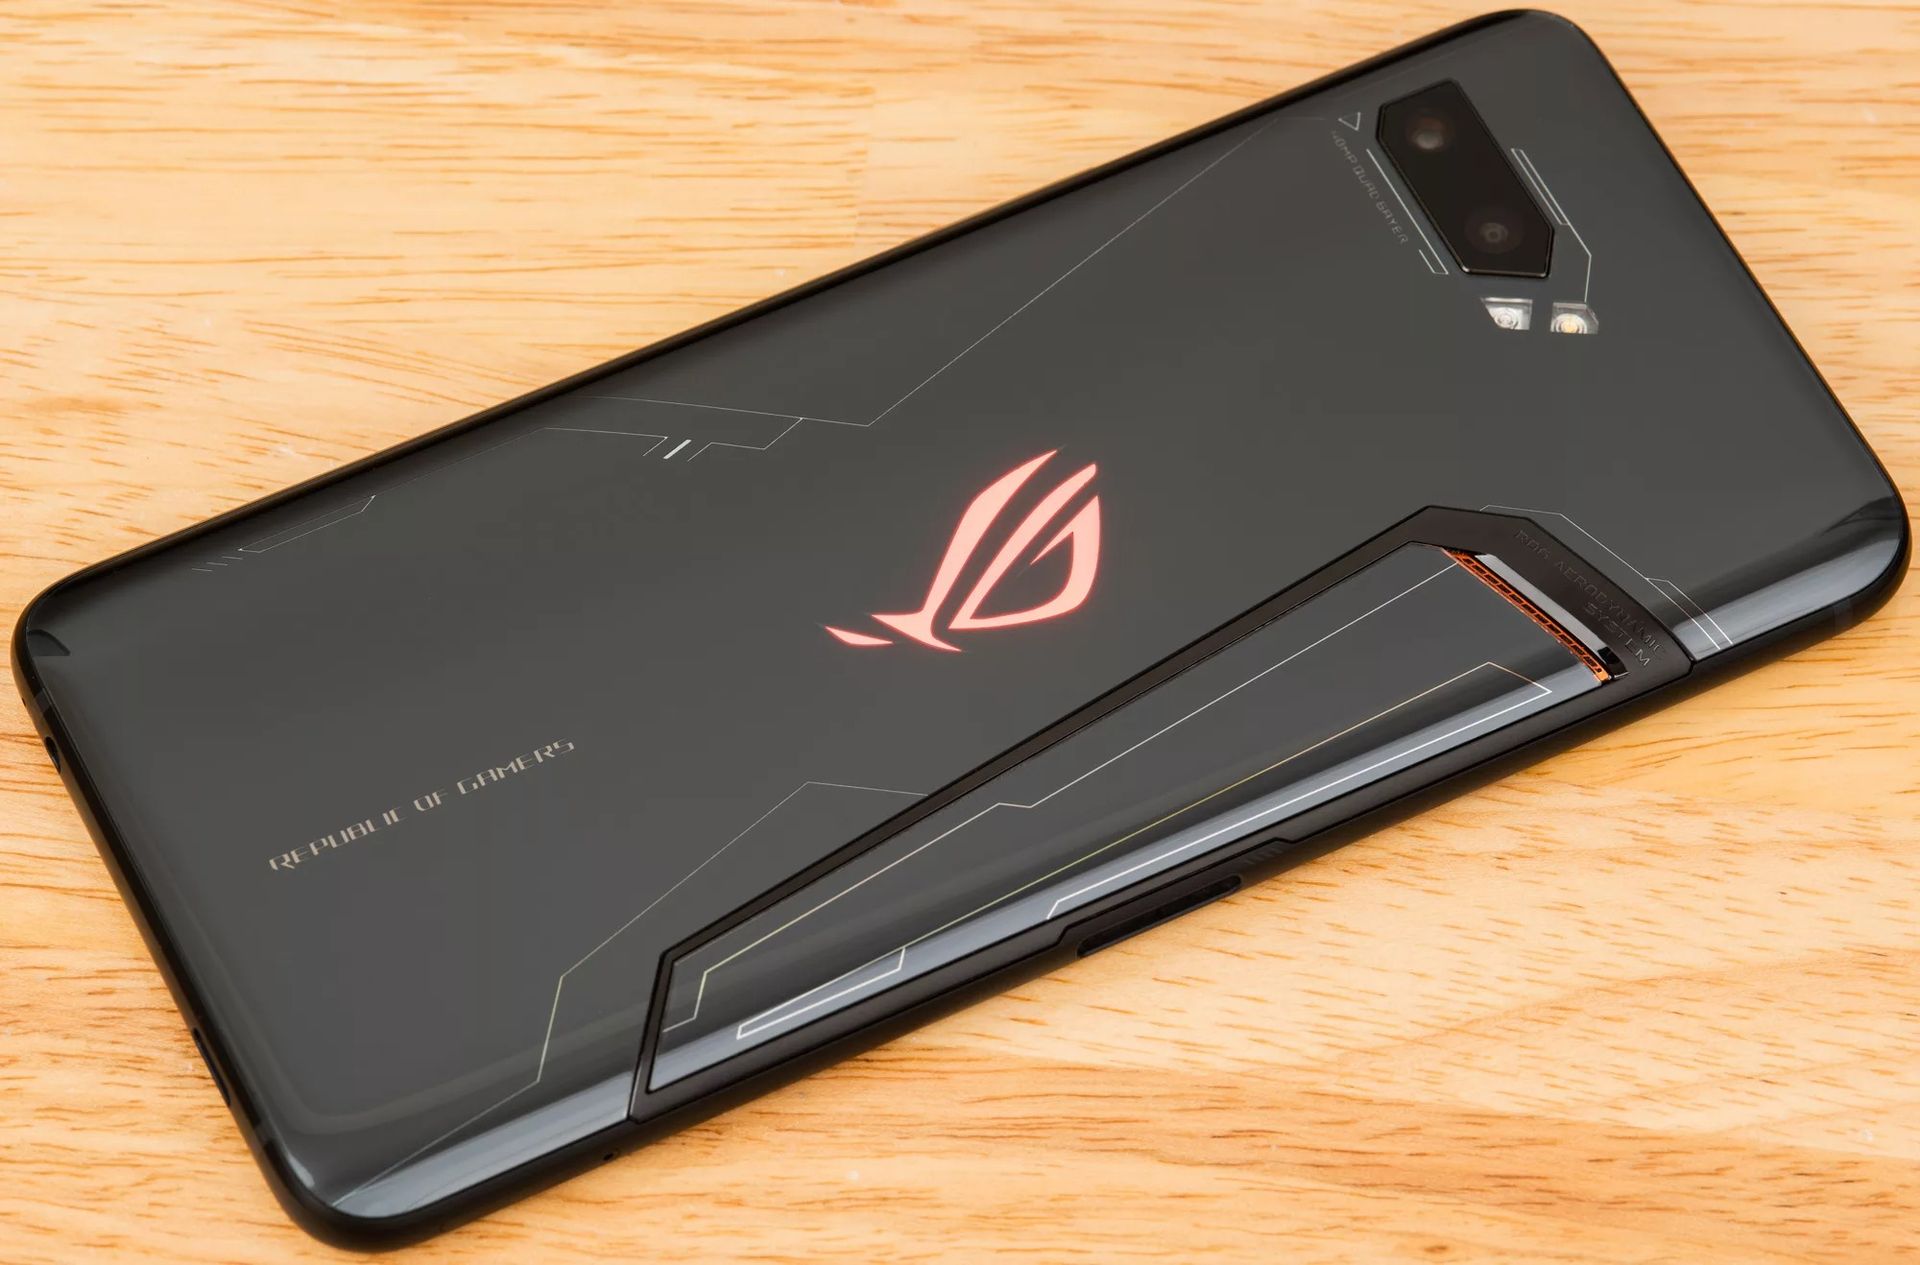 asus-rog-phone-2-news-and-features